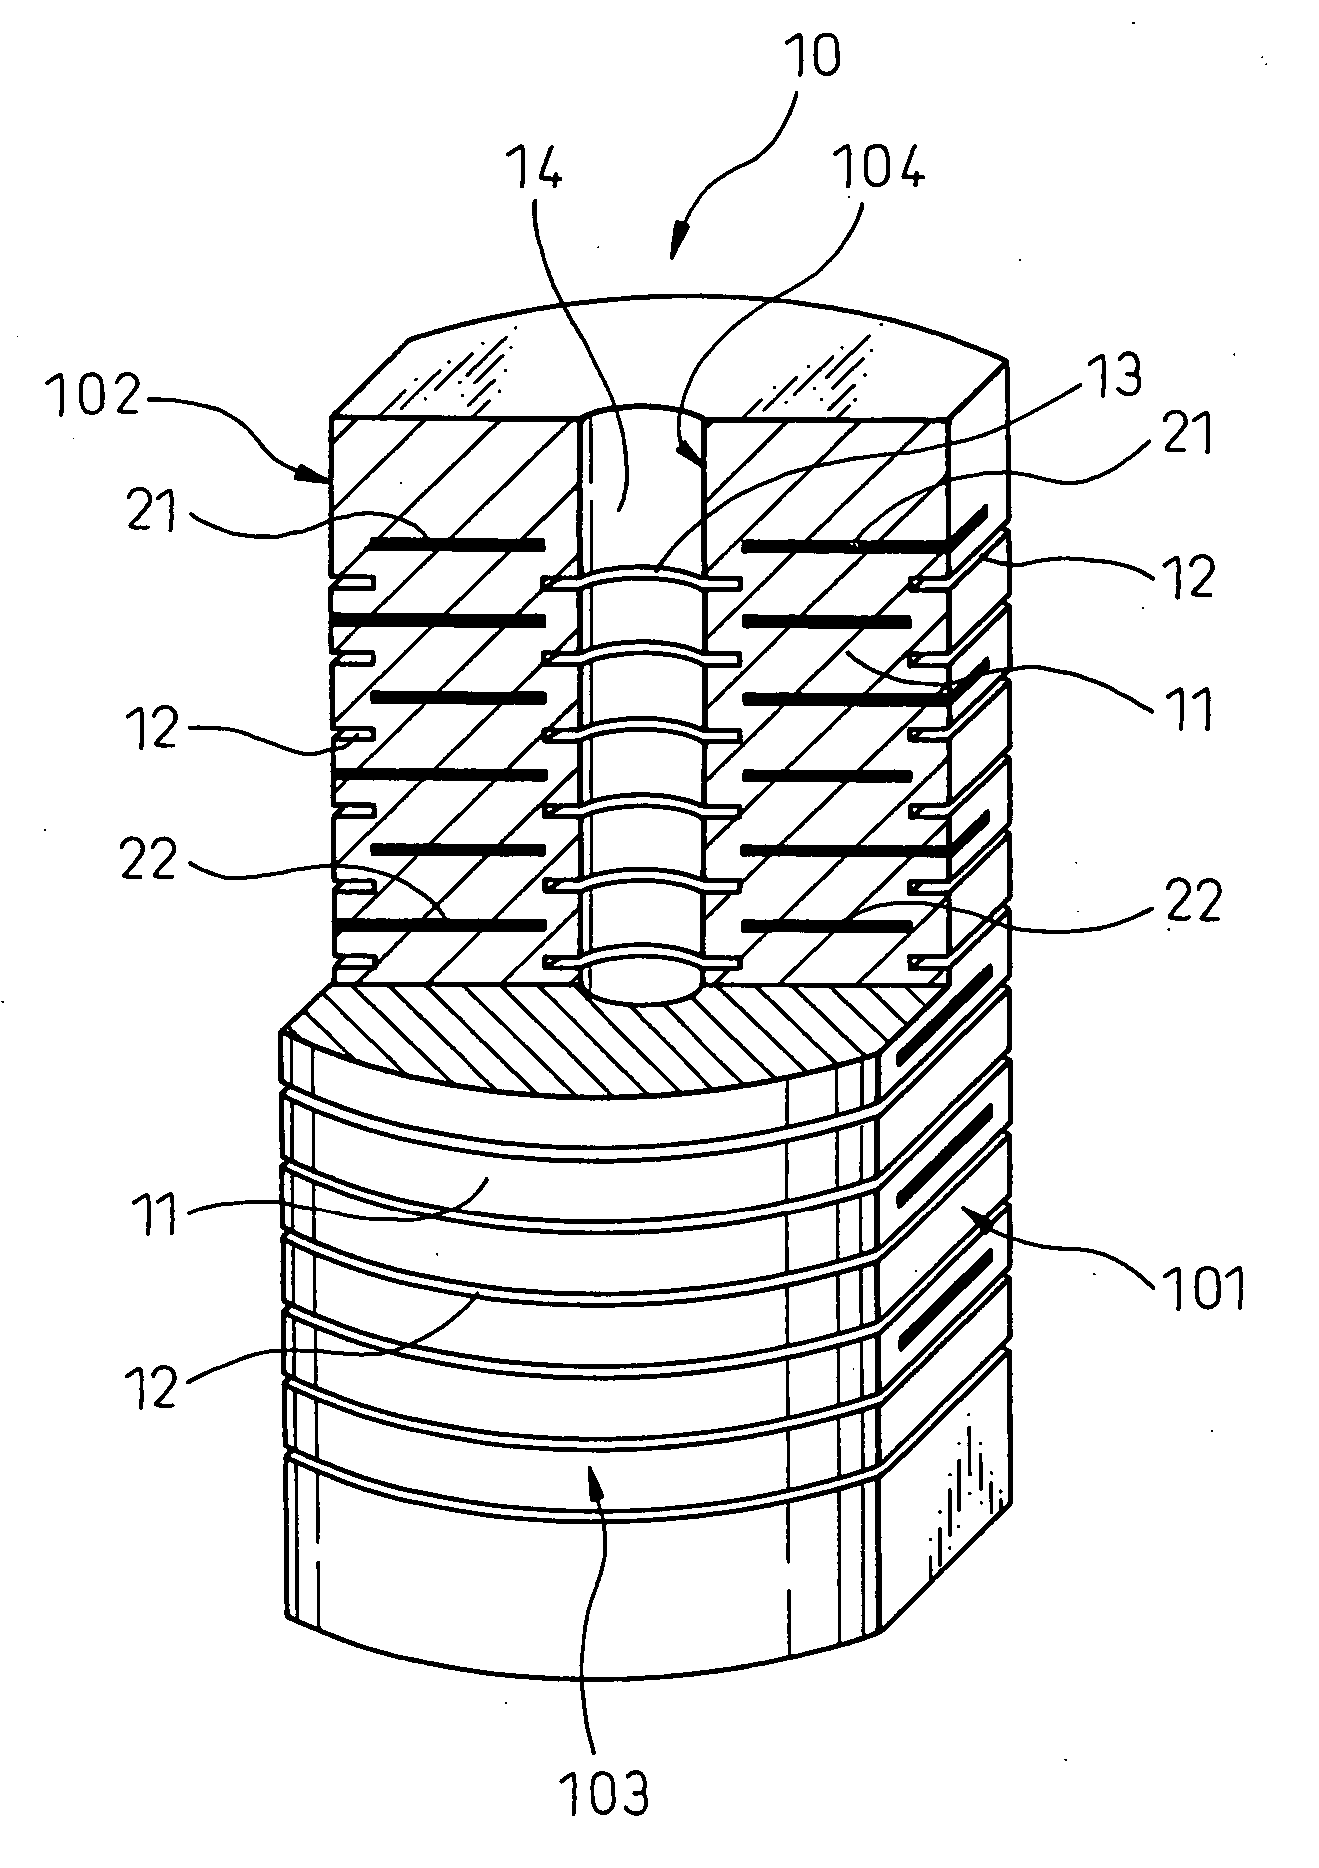 Hollow laminated piezoelectric element and its manufacturing method